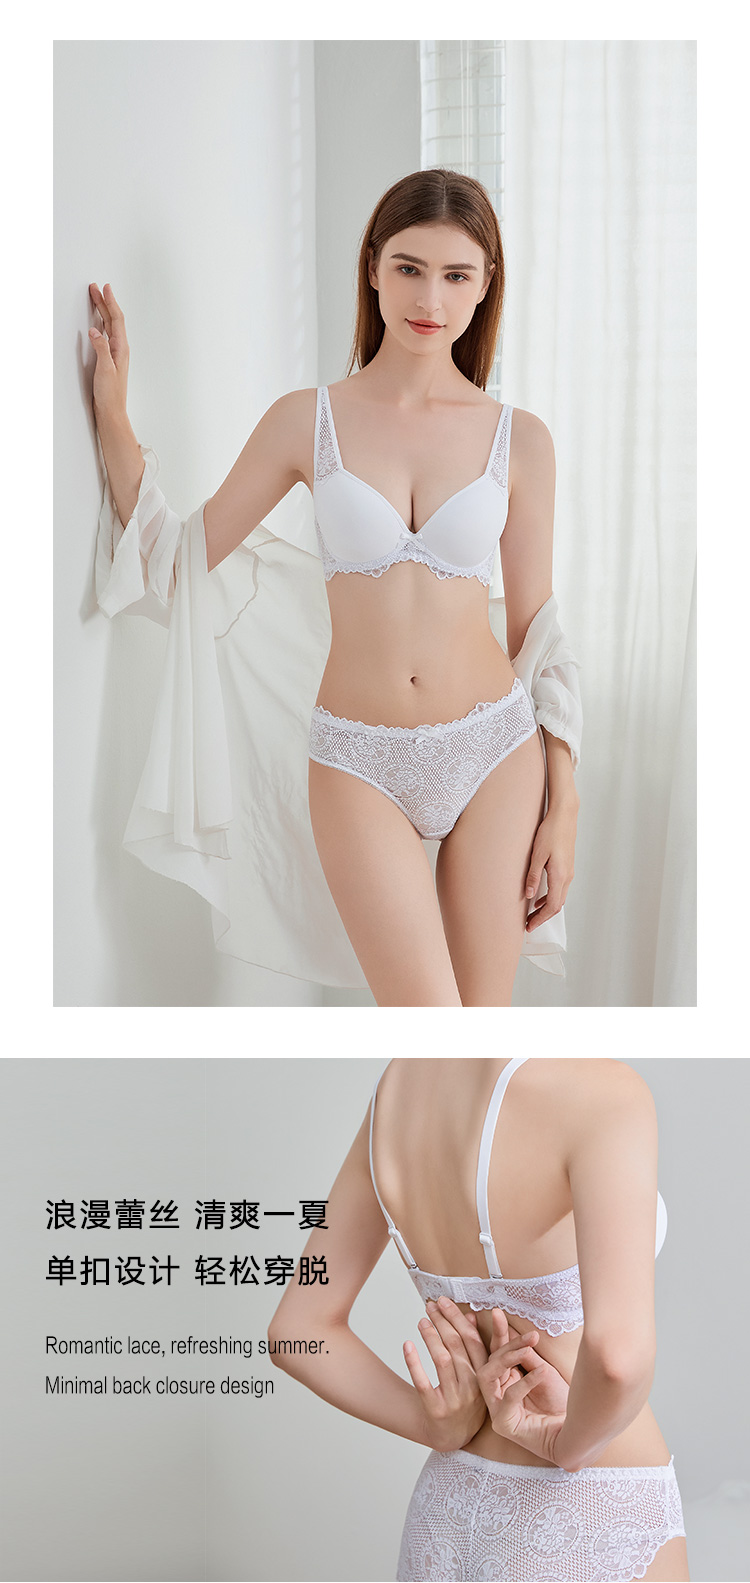 A8208#B, A8209#D  Cloud Cotton Hand-shaped Mold Cup Lace Bra Set,Weiyesi -  Fashion bras and lingerie for women